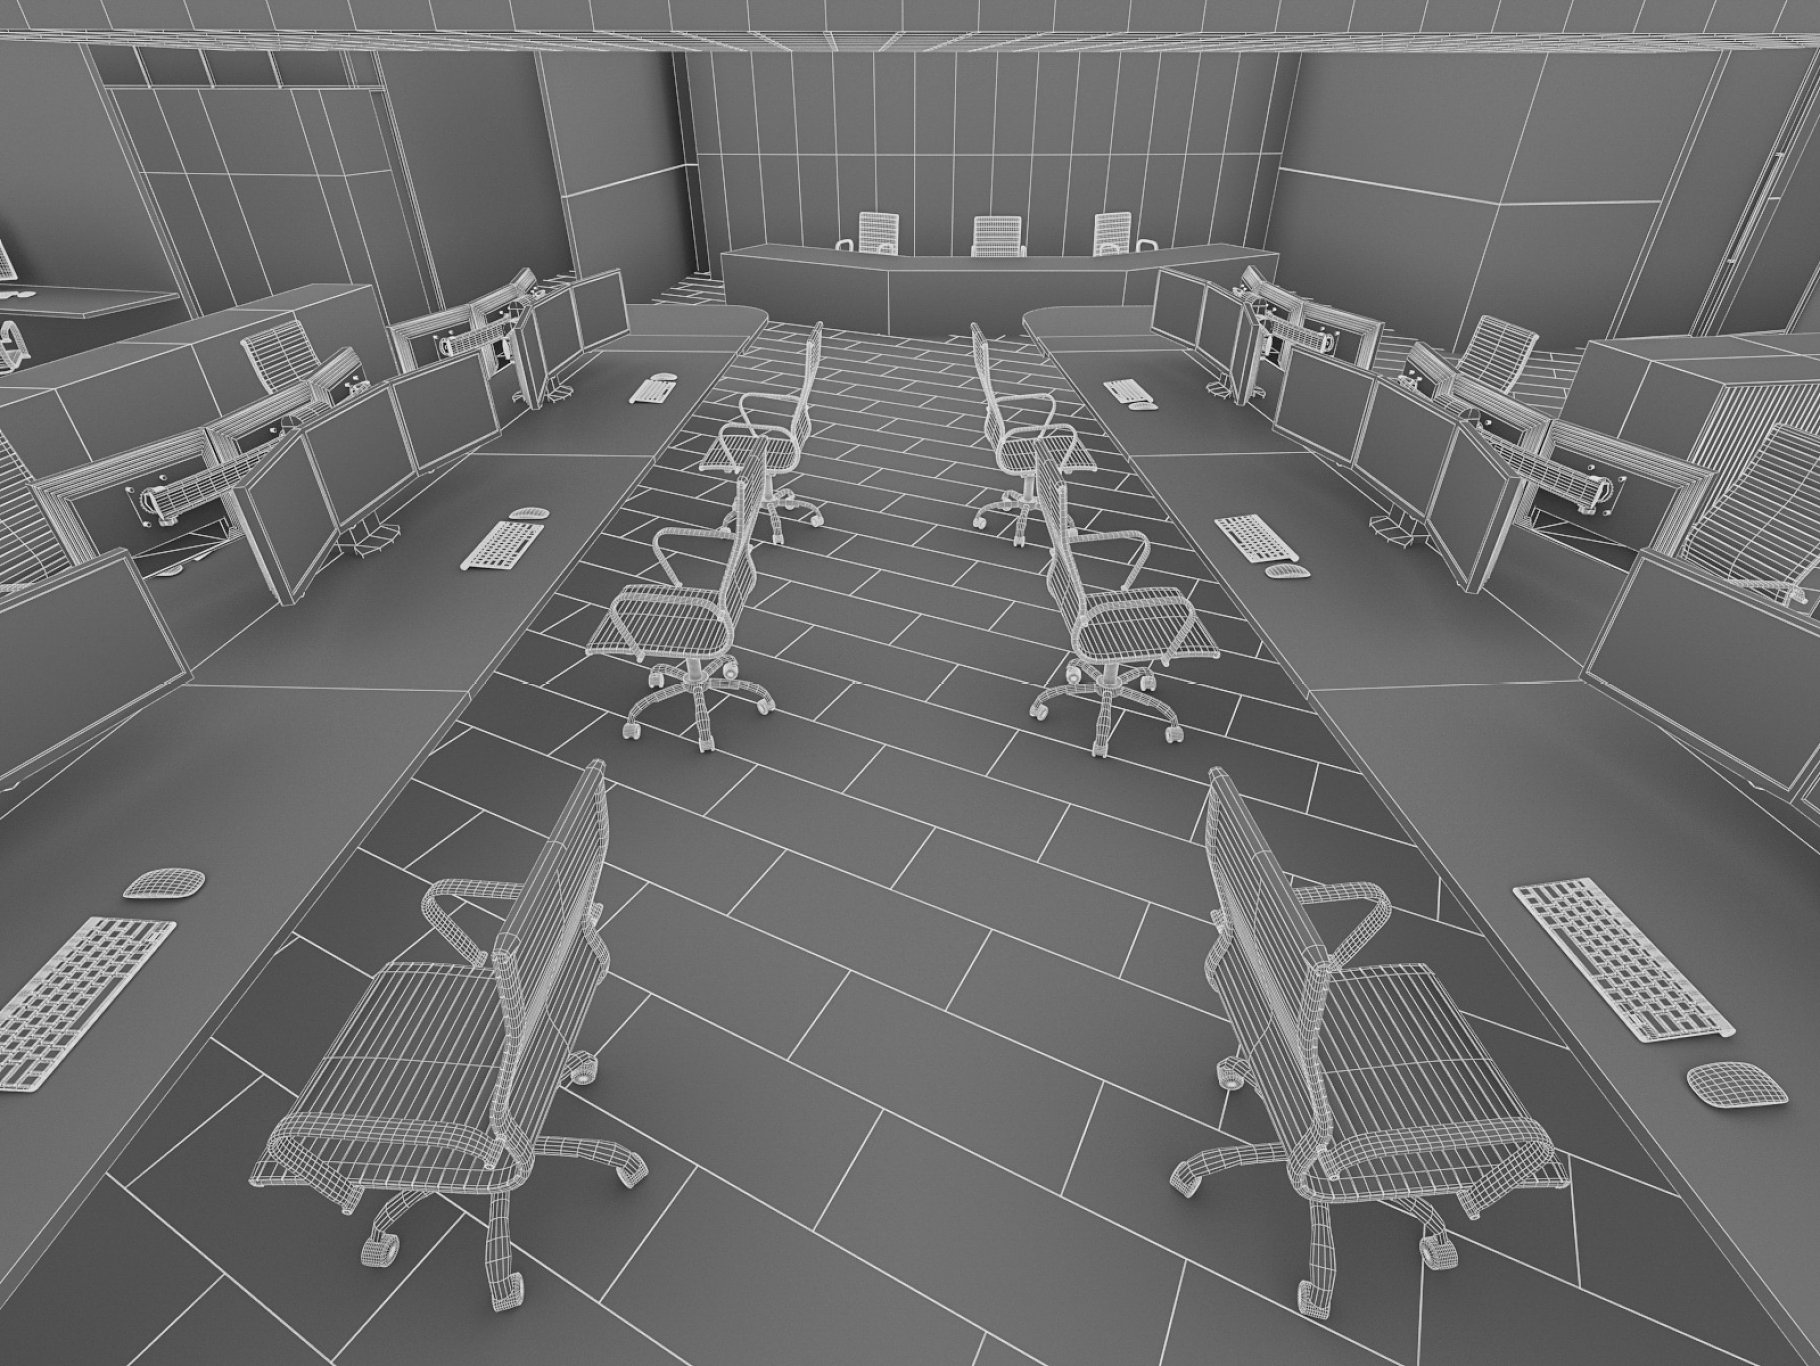 Rendering of a charming 3d model of an office interior without textures